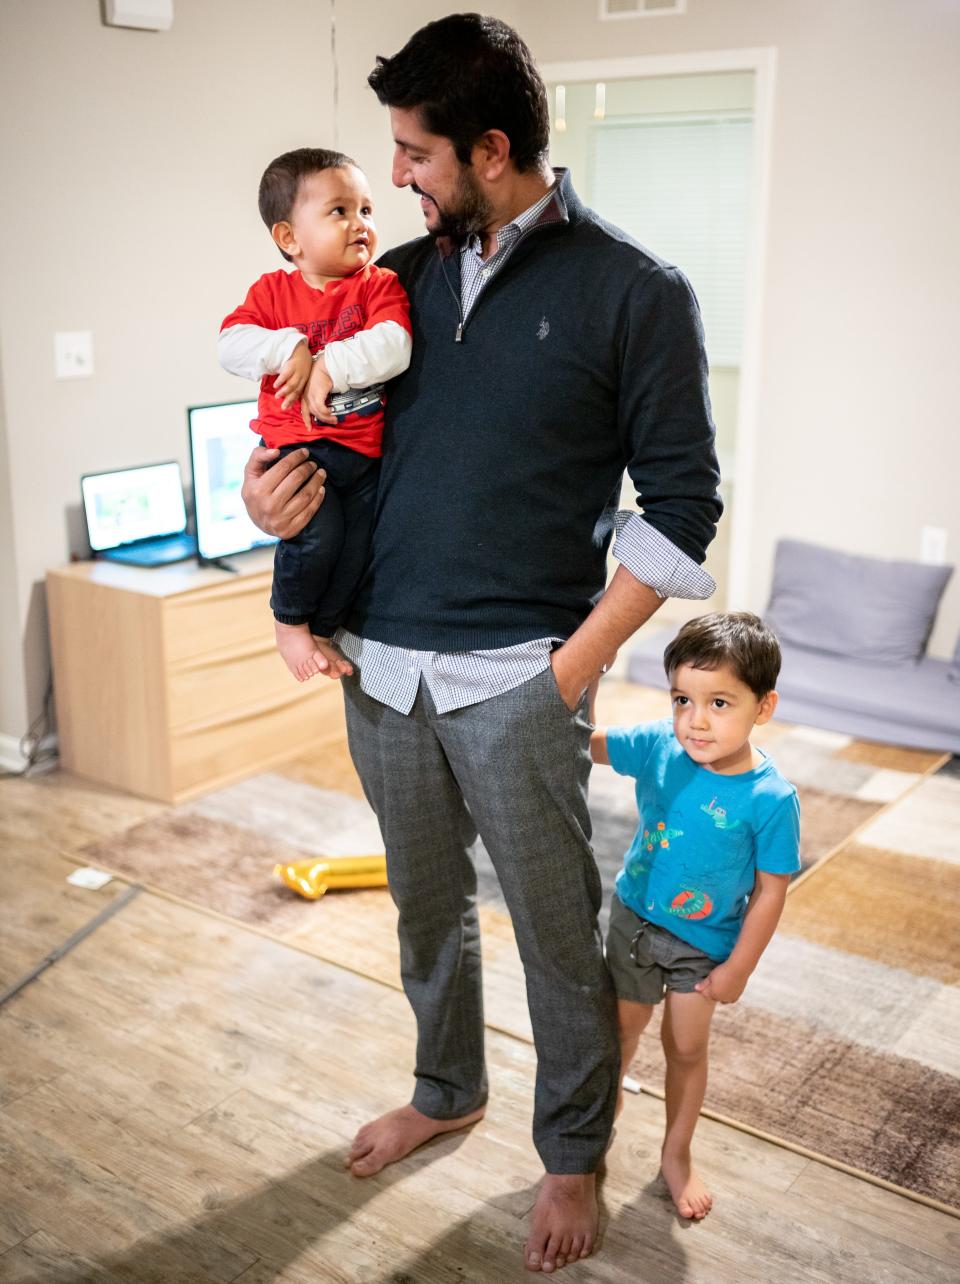 Rafi Sherzad spends time with his sons, Khushal Sherzad, left, 1, and Abdaal Sherzad, right, 3, at his apartment in Nashville on Dec. 21, 2021. Sherzad, a former Nashville resident, left Afghanistan with several relatives last year to escape the Taliban.